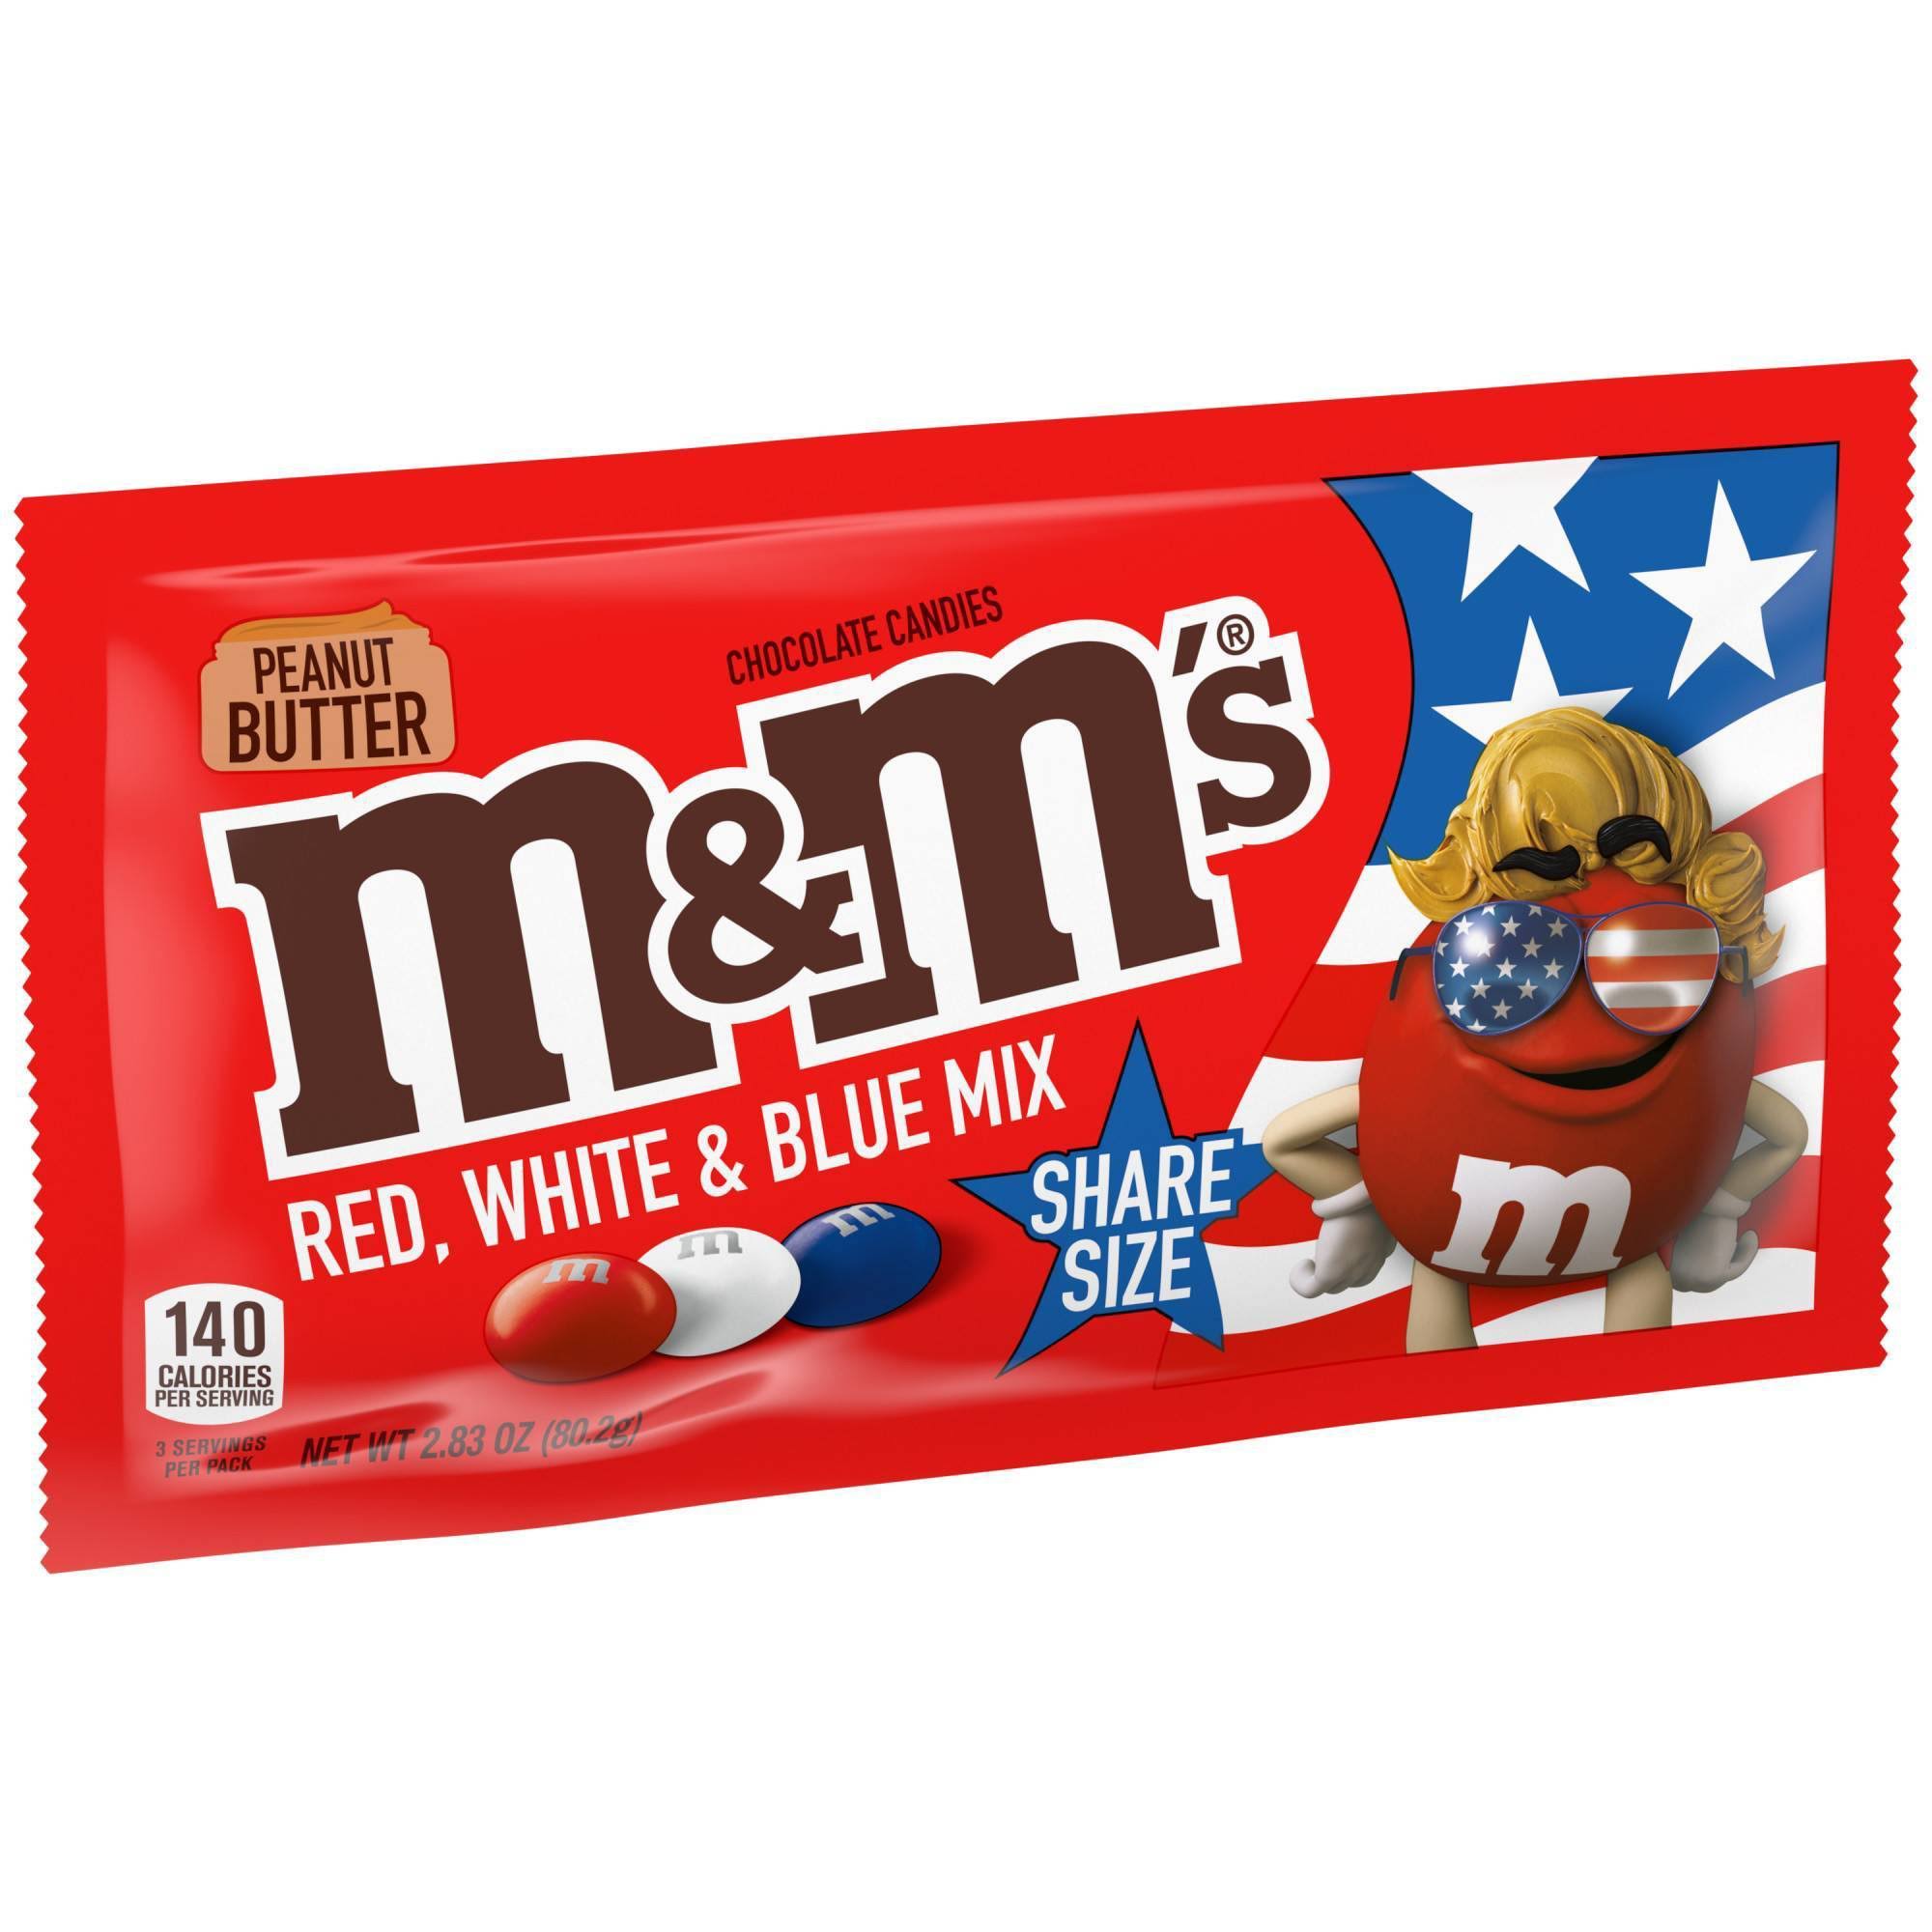 M&M's Chocolate Candies, Peanut Butter, Red, White & Blue Mix, Share Size - 2.83 oz